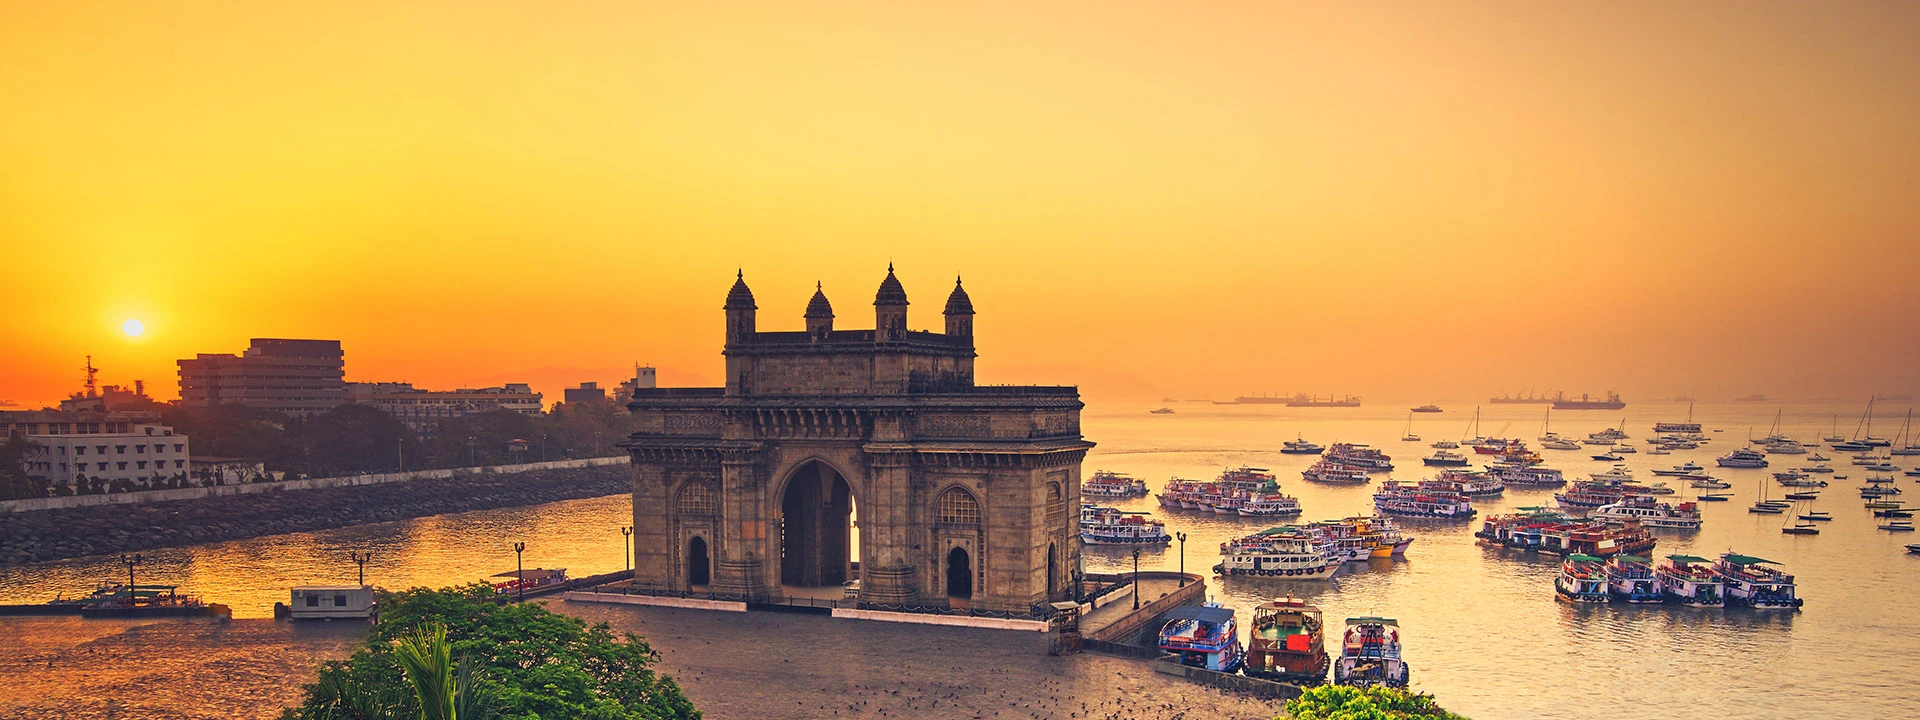 the gate of mumbai at sunset surrounded by colourful boats